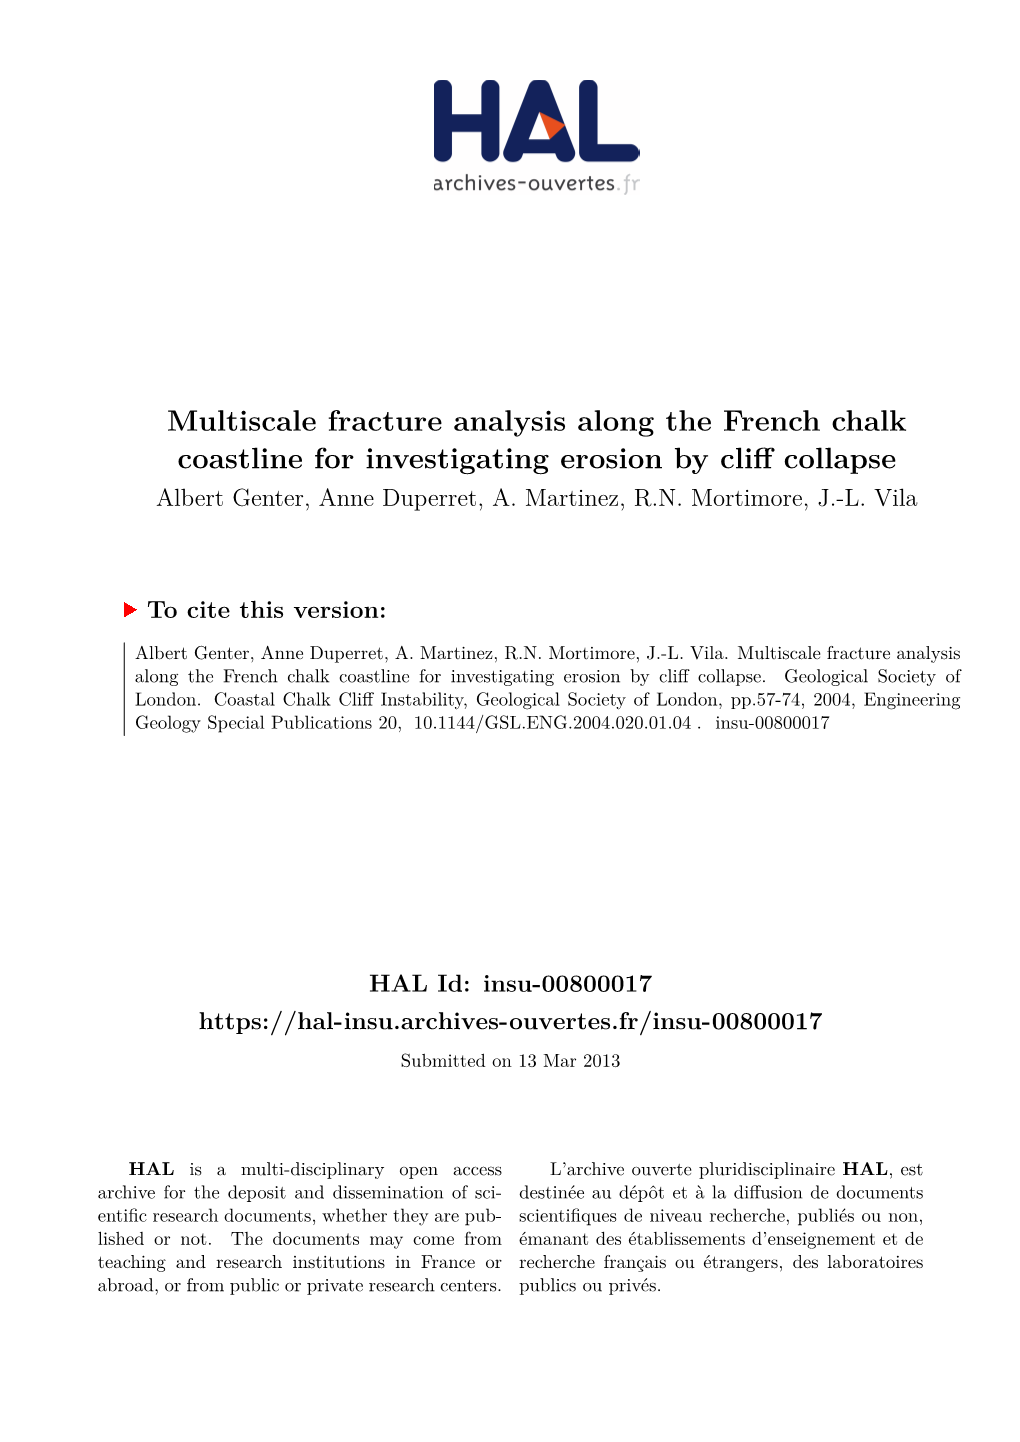 Multiscale Fracture Analysis Along the French Chalk Coastline for Investigating Erosion by Cliff Collapse Albert Genter, Anne Duperret, A